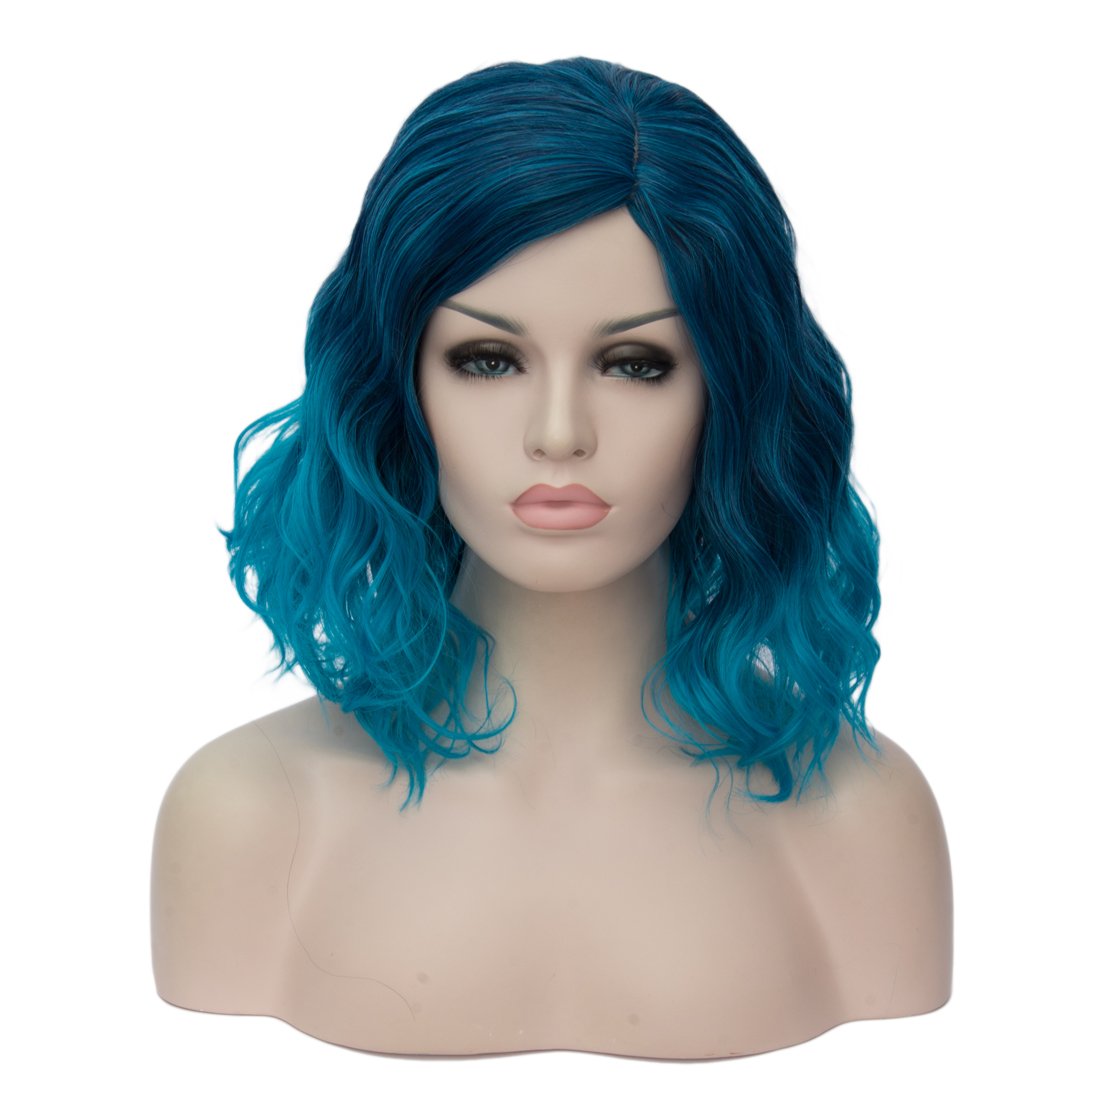 blue wavy wig blue wig bob wigs cosplay wig HAIR Synthetic Curly Bob Wig with Bangs Short Bob Wavy Hair Wigs Wine Red Color Wigs for Women Bob Style Synthetic Heat Resistant Bob Wigs.